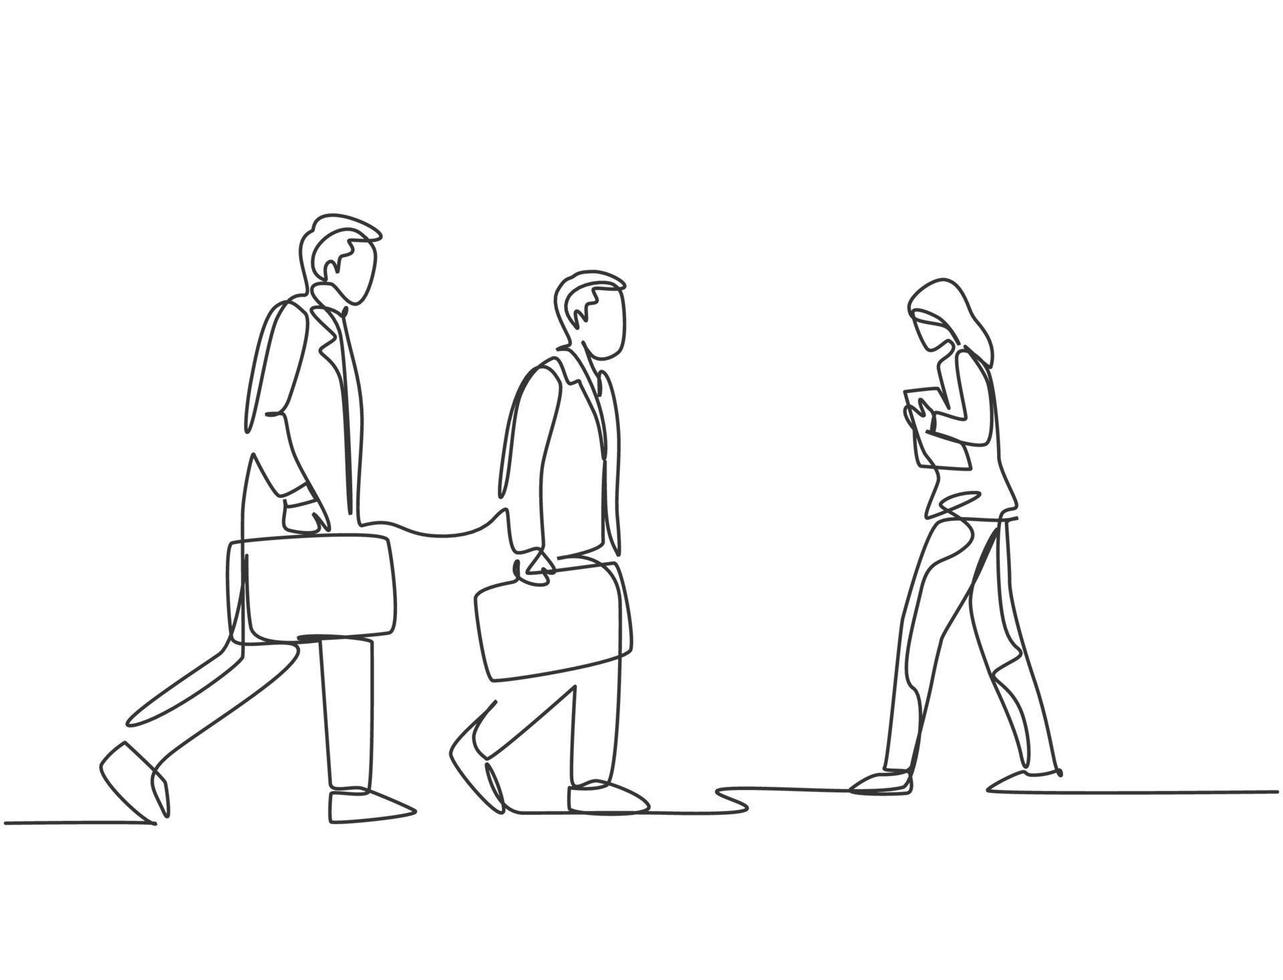 Single continuous line drawing of group urban commuters walking pass over and over again on city street go to the office. Urban commuter workers concept one line draw design vector illustration